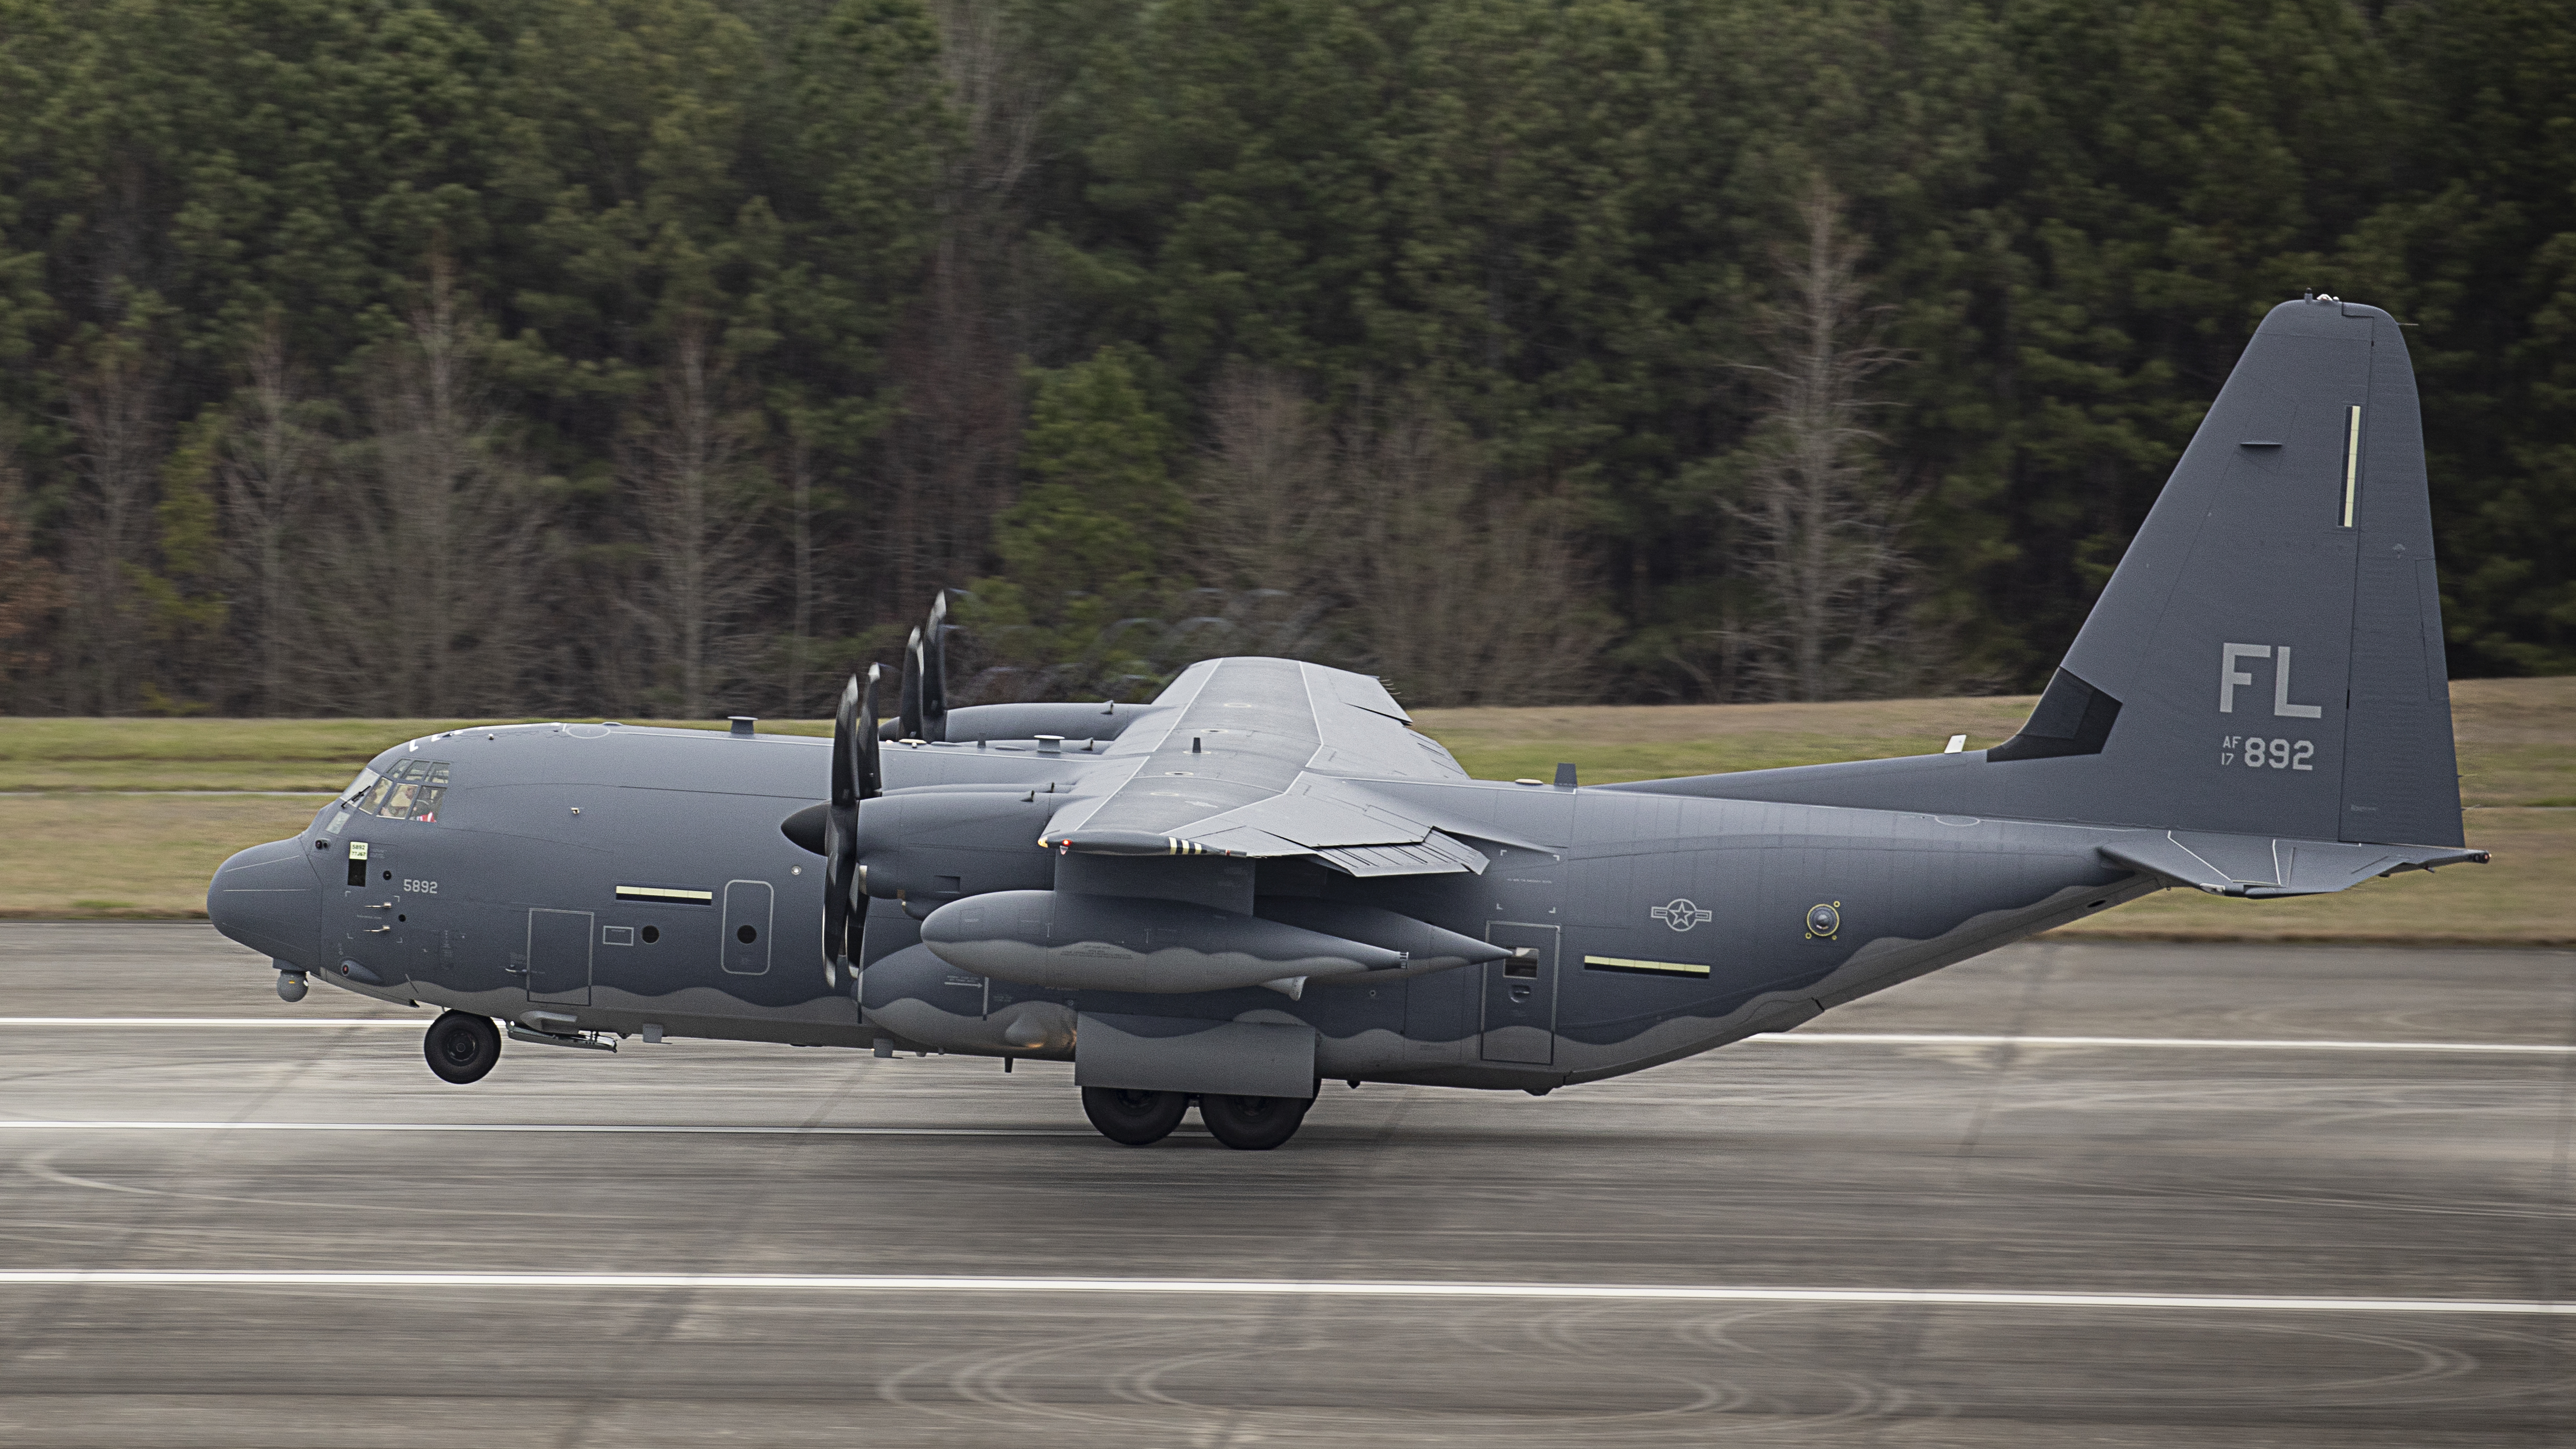 Lockheed Martin Delivers The U.S. Air Force Reserveâ€™s First HC-130J Combat King II